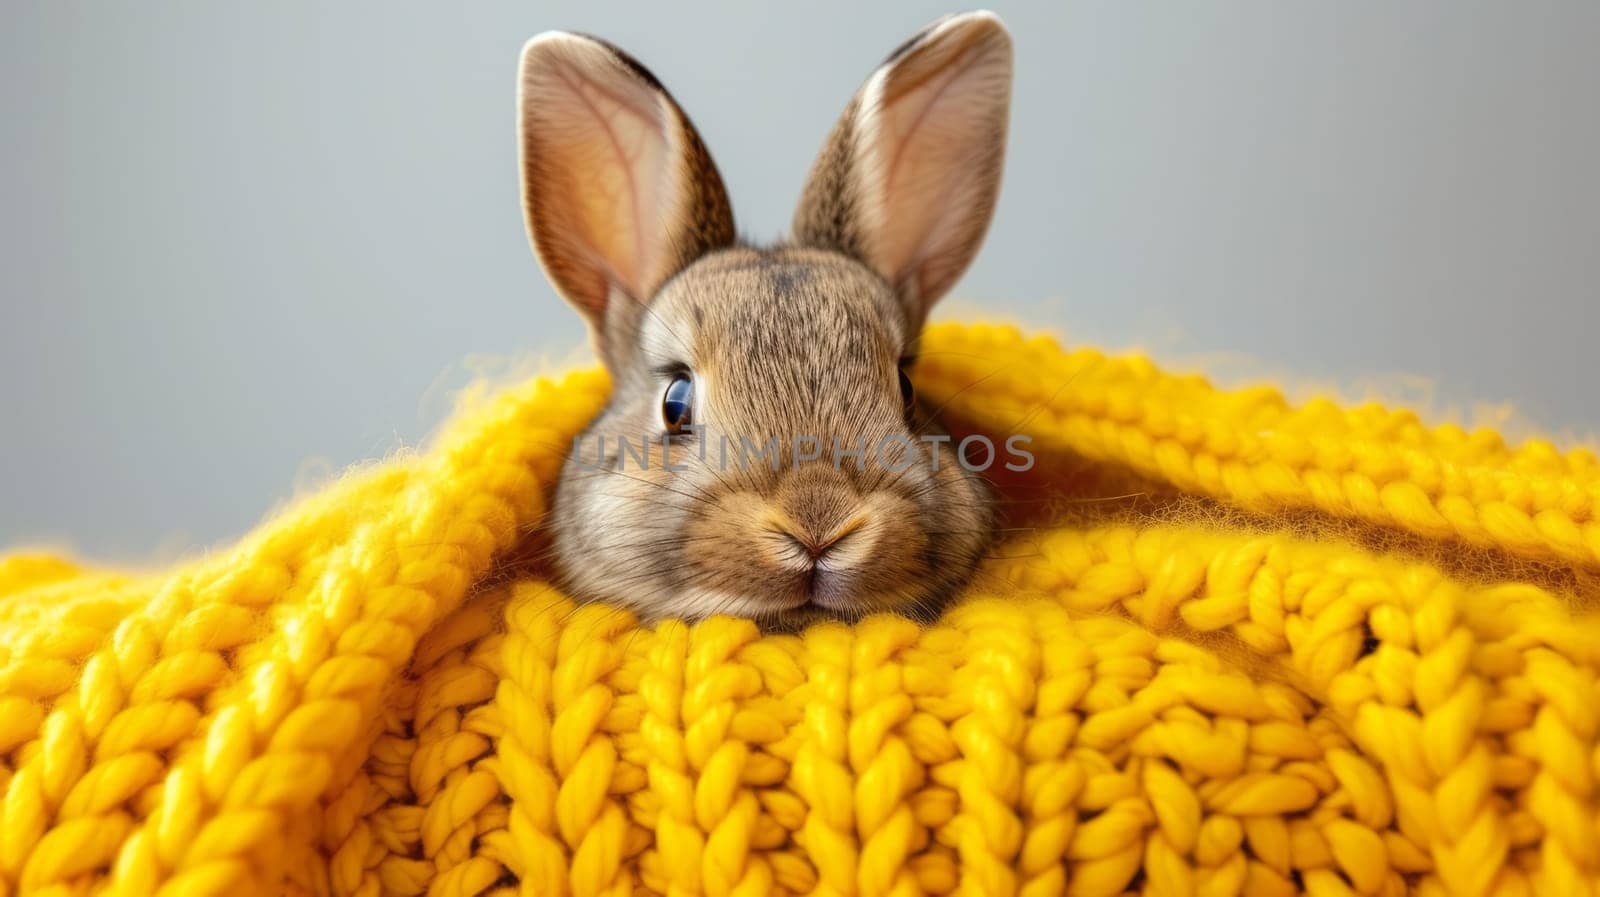 Cute Fluffy Easter Bunny in Yellow Blanket. Funny Rabbit Portrait.